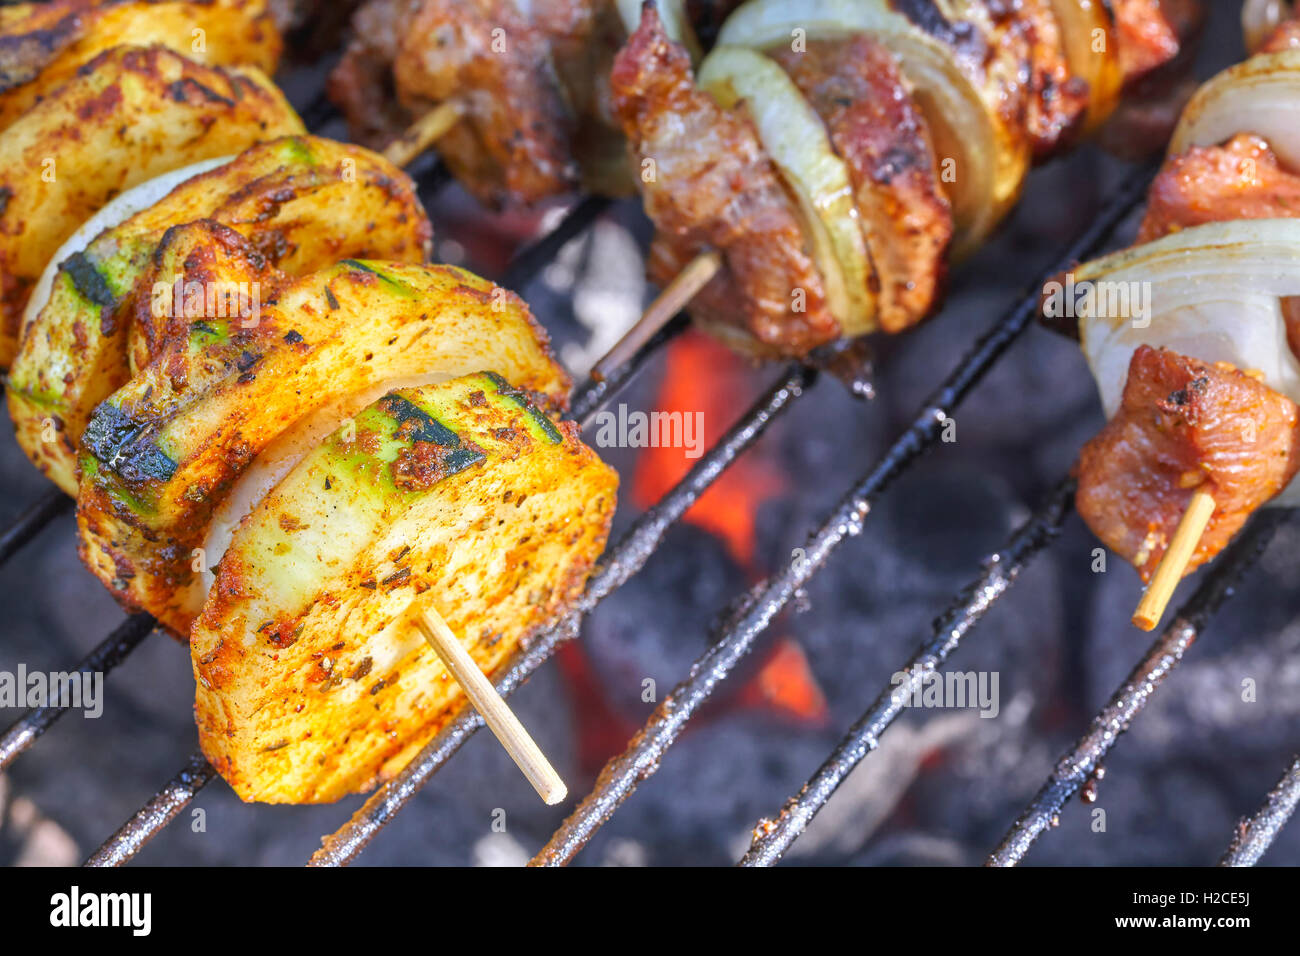 Close up picture of a zucchini and meat skewers, garden barbecue, selective focus. Stock Photo